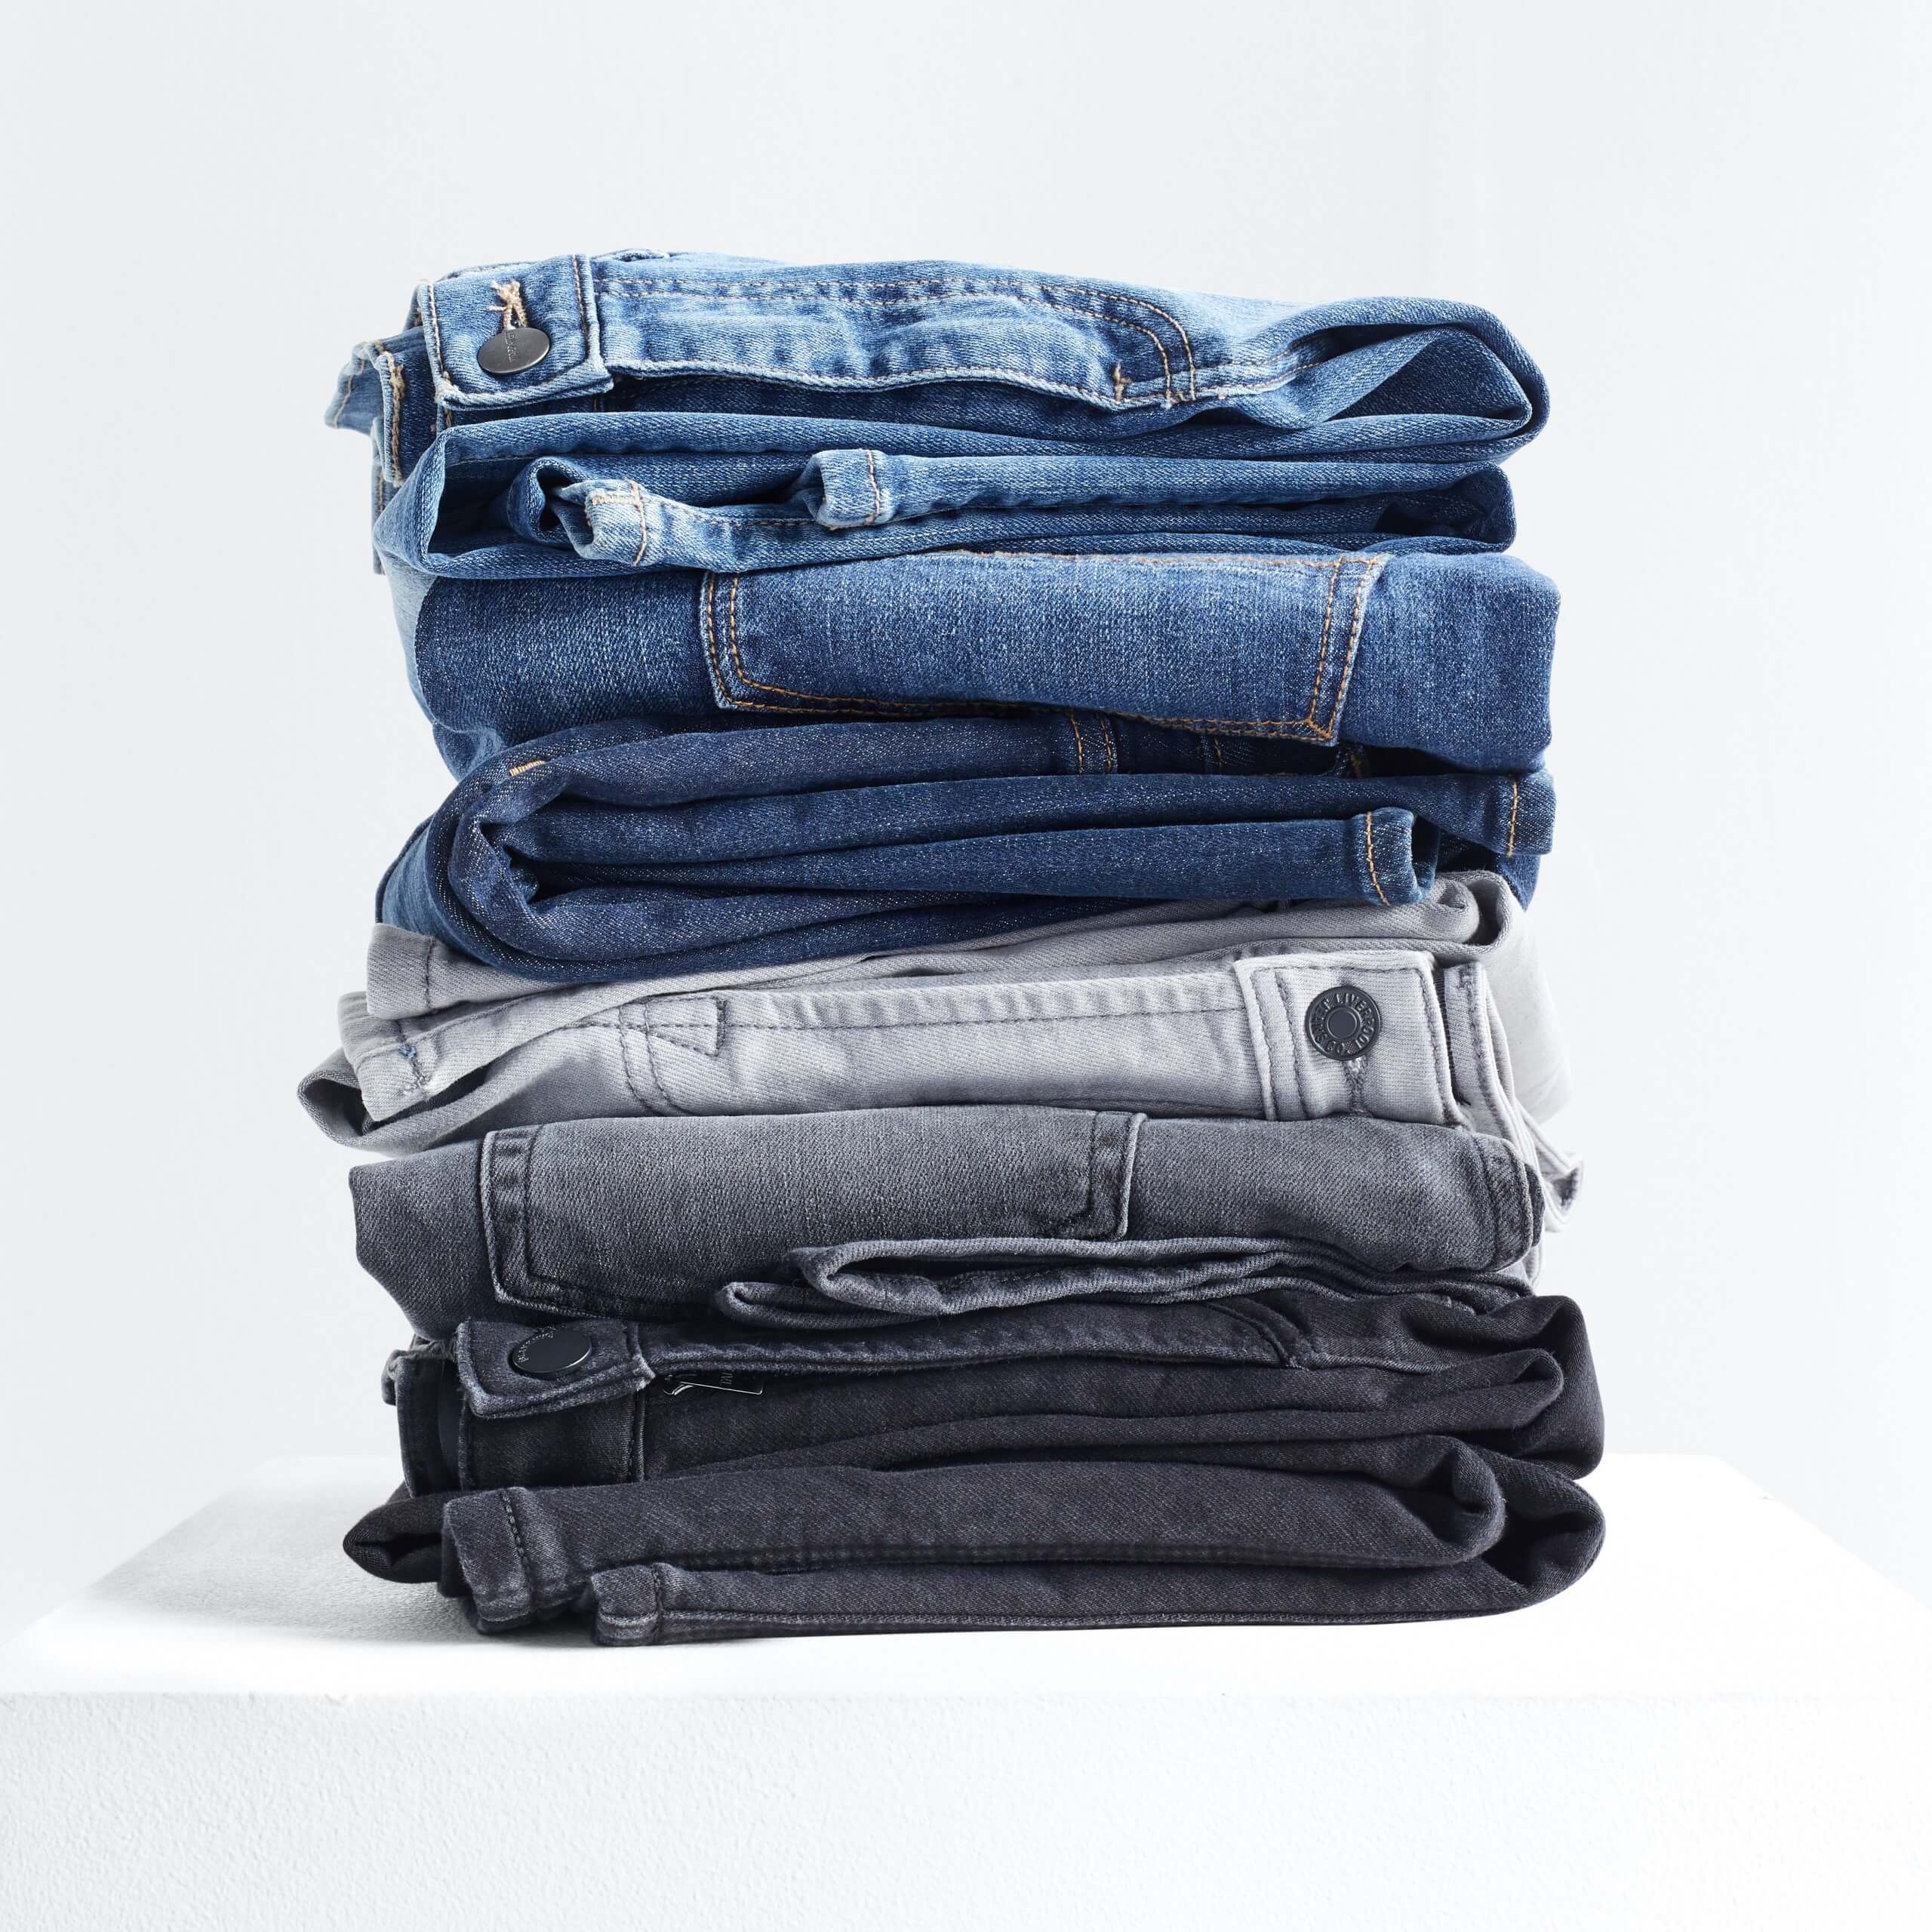 What's the quickest way to break in new jeans?